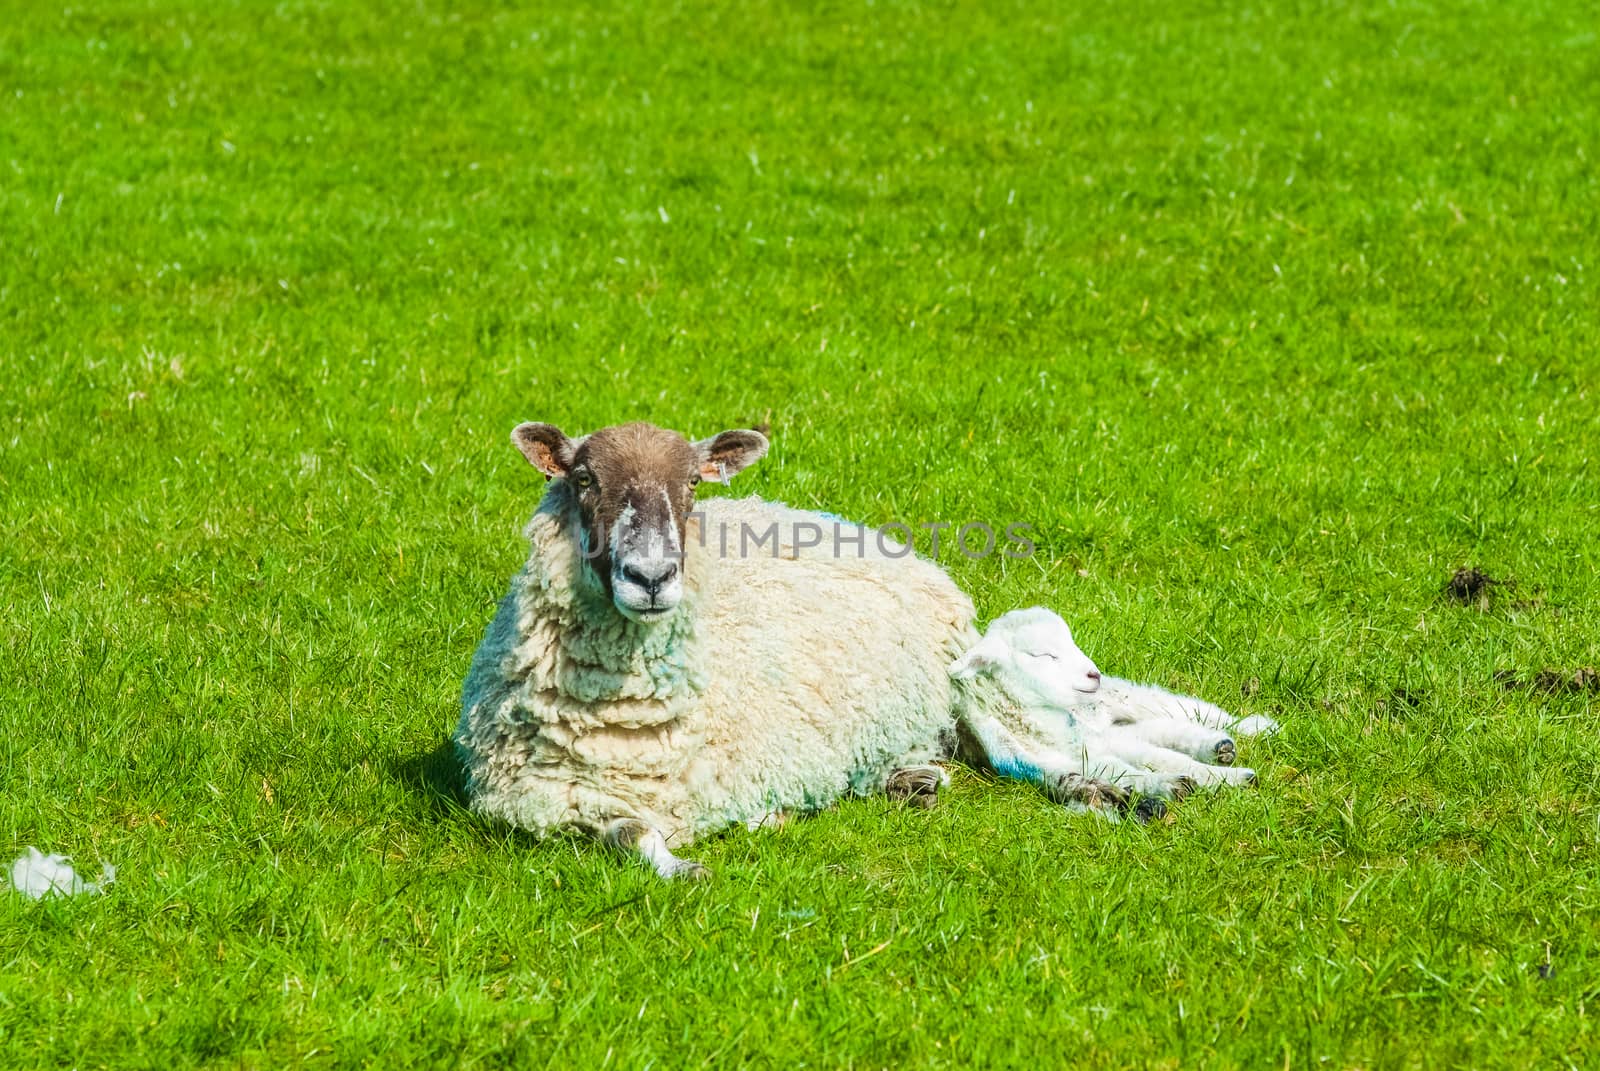 sheep and its lamb in a field in Springtime UK by paddythegolfer